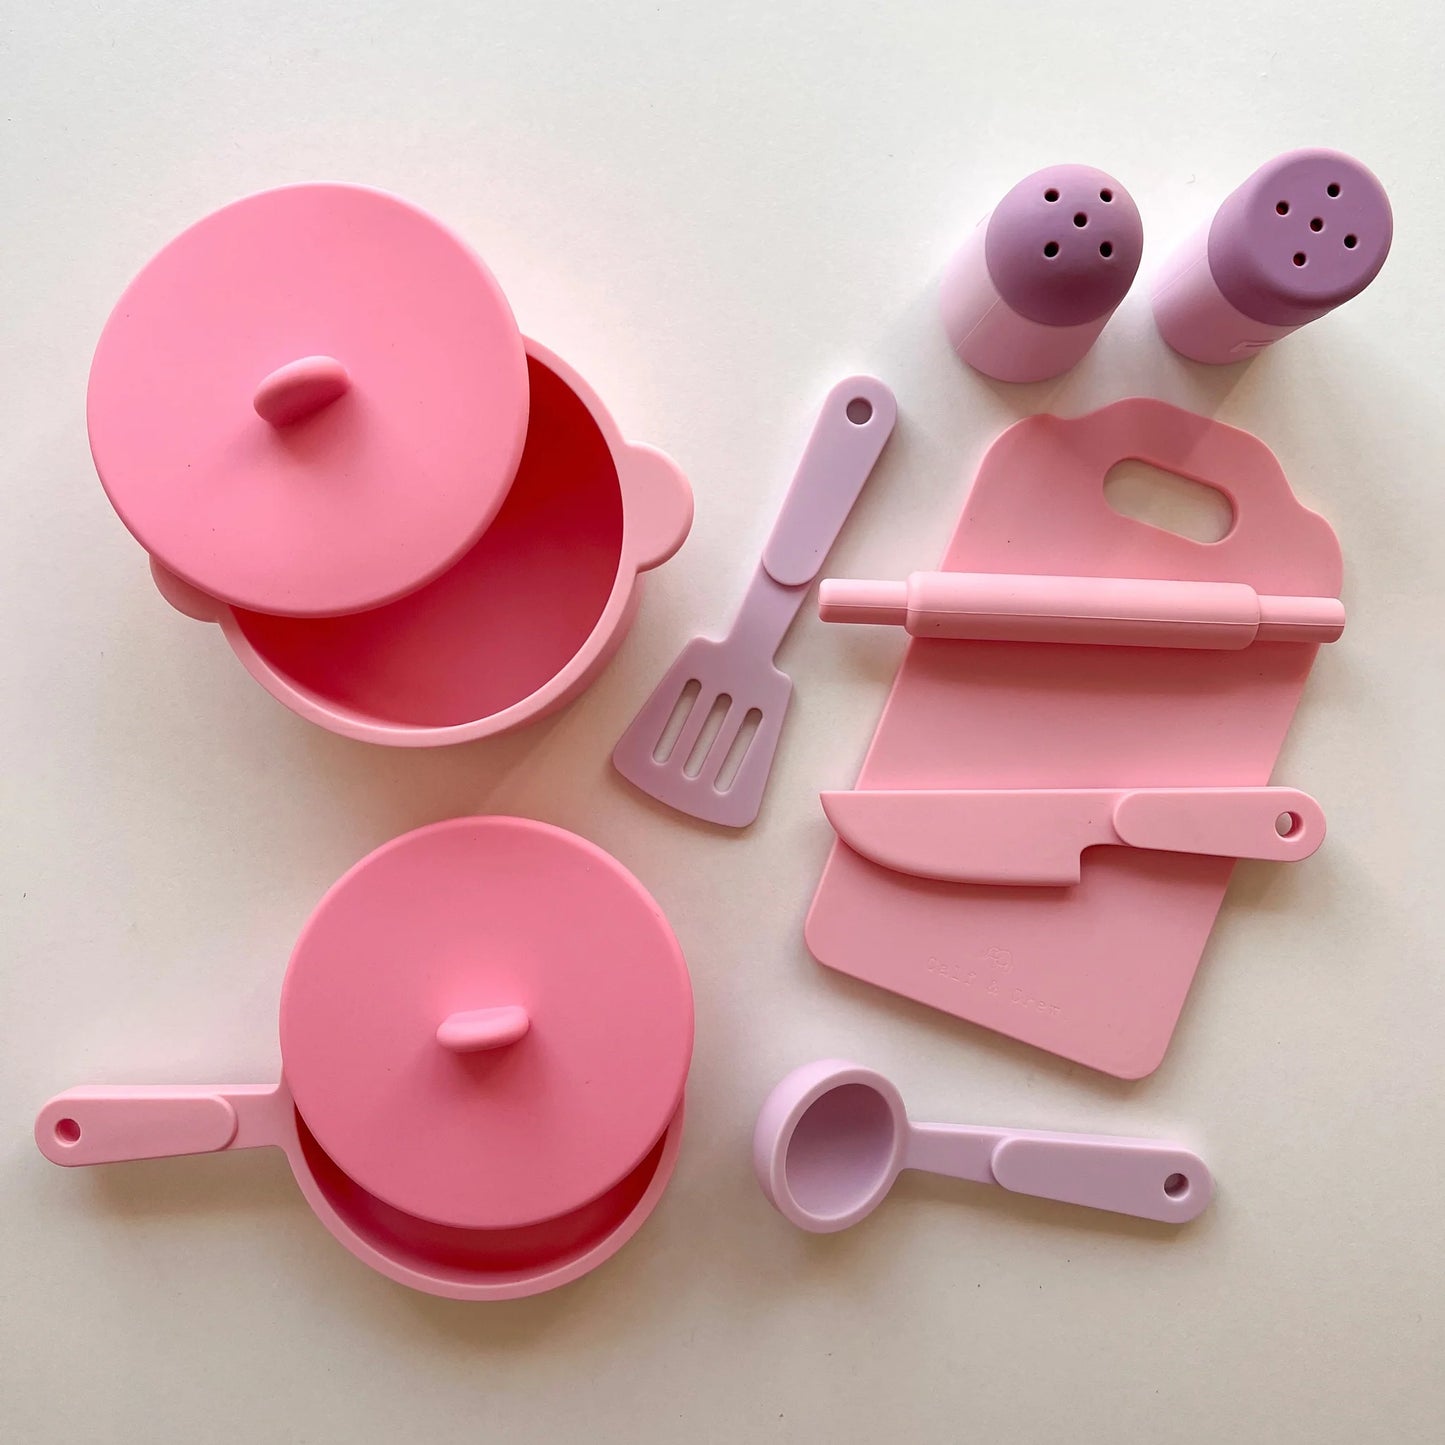 Silicone Kitchen Toy Sets